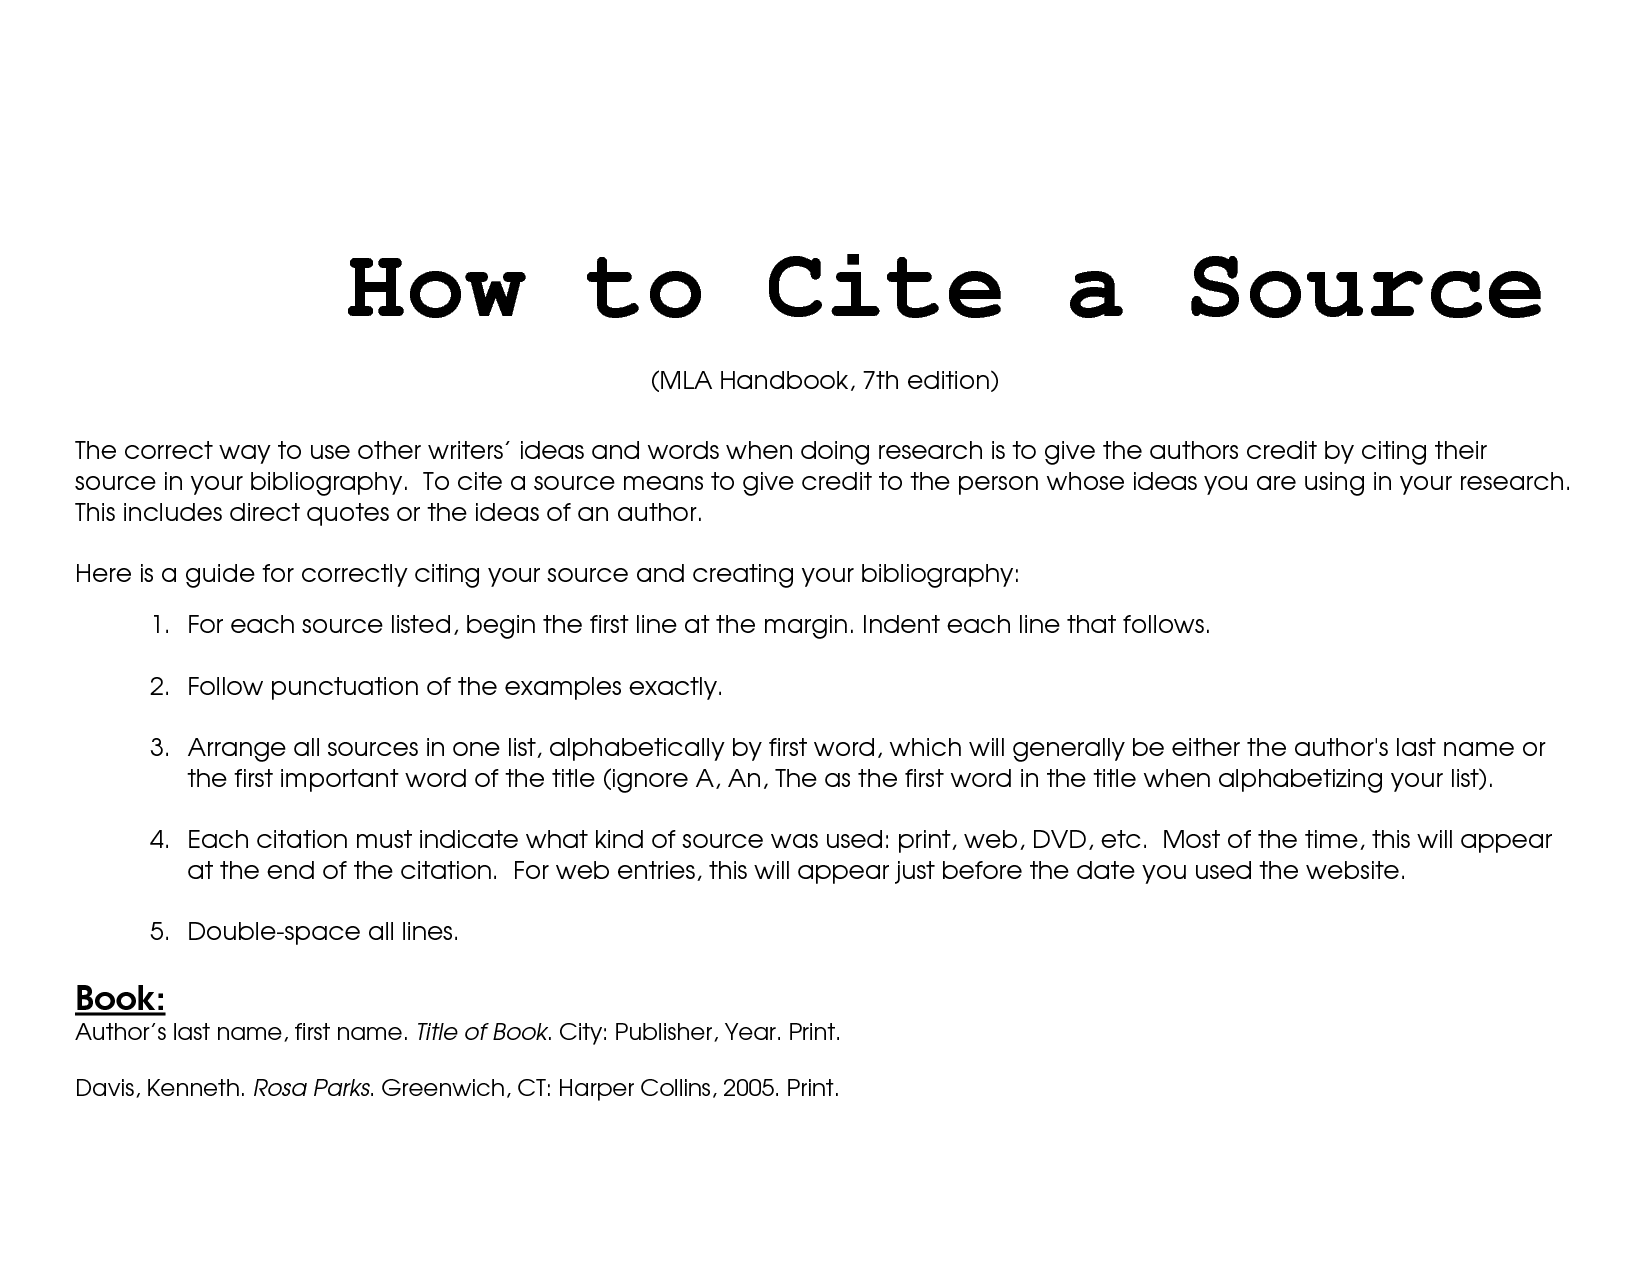 How to Cite and Format a Quote to Use in an Essay